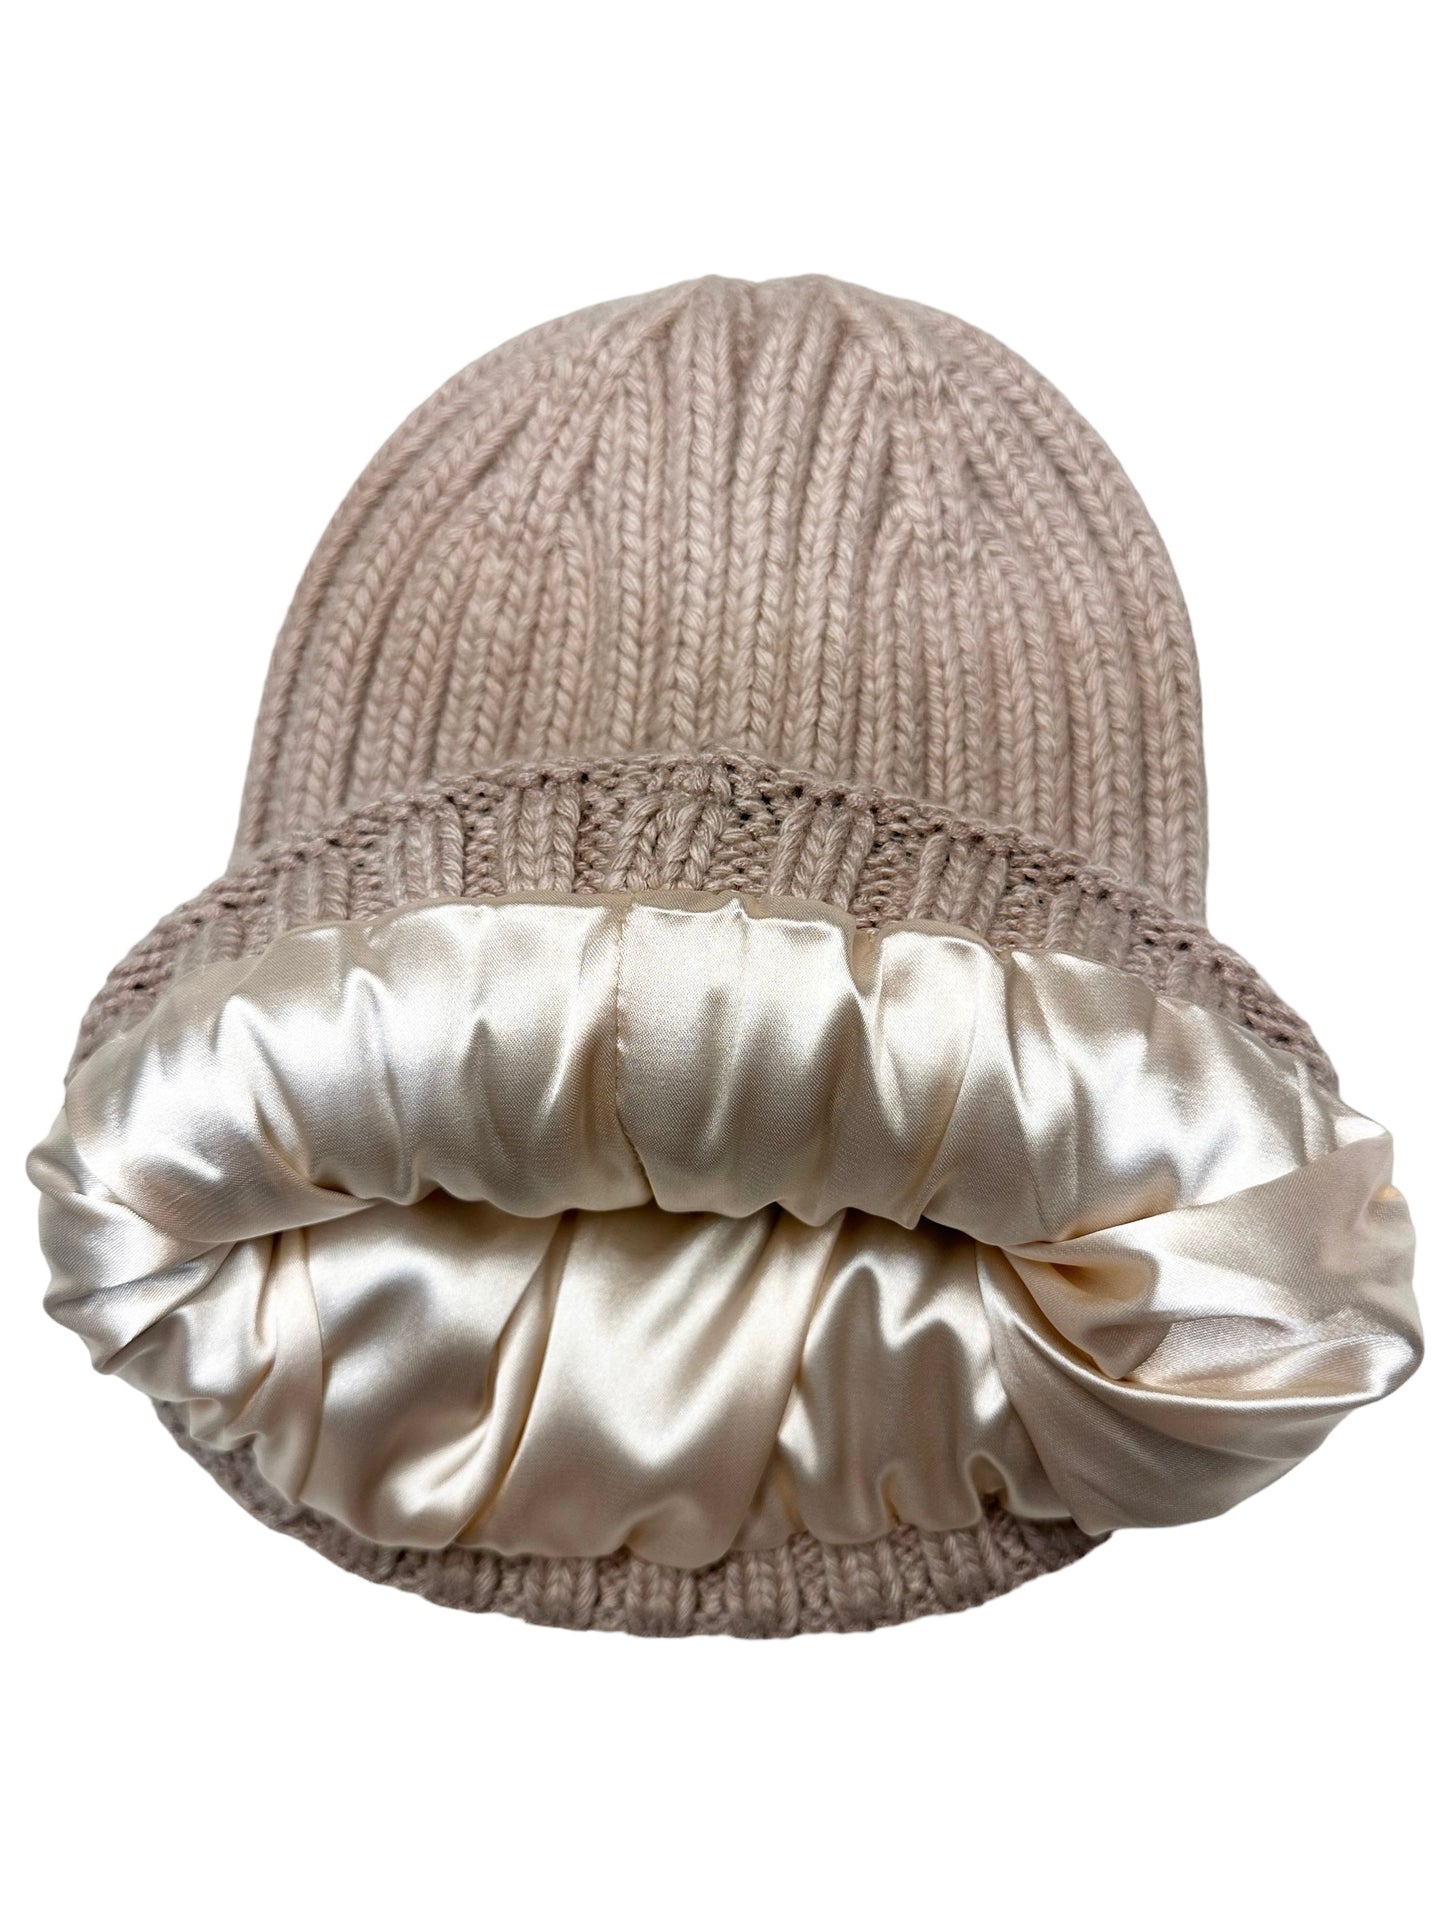 Luxury Unisex Silk Lined Beanie | Great hair protection